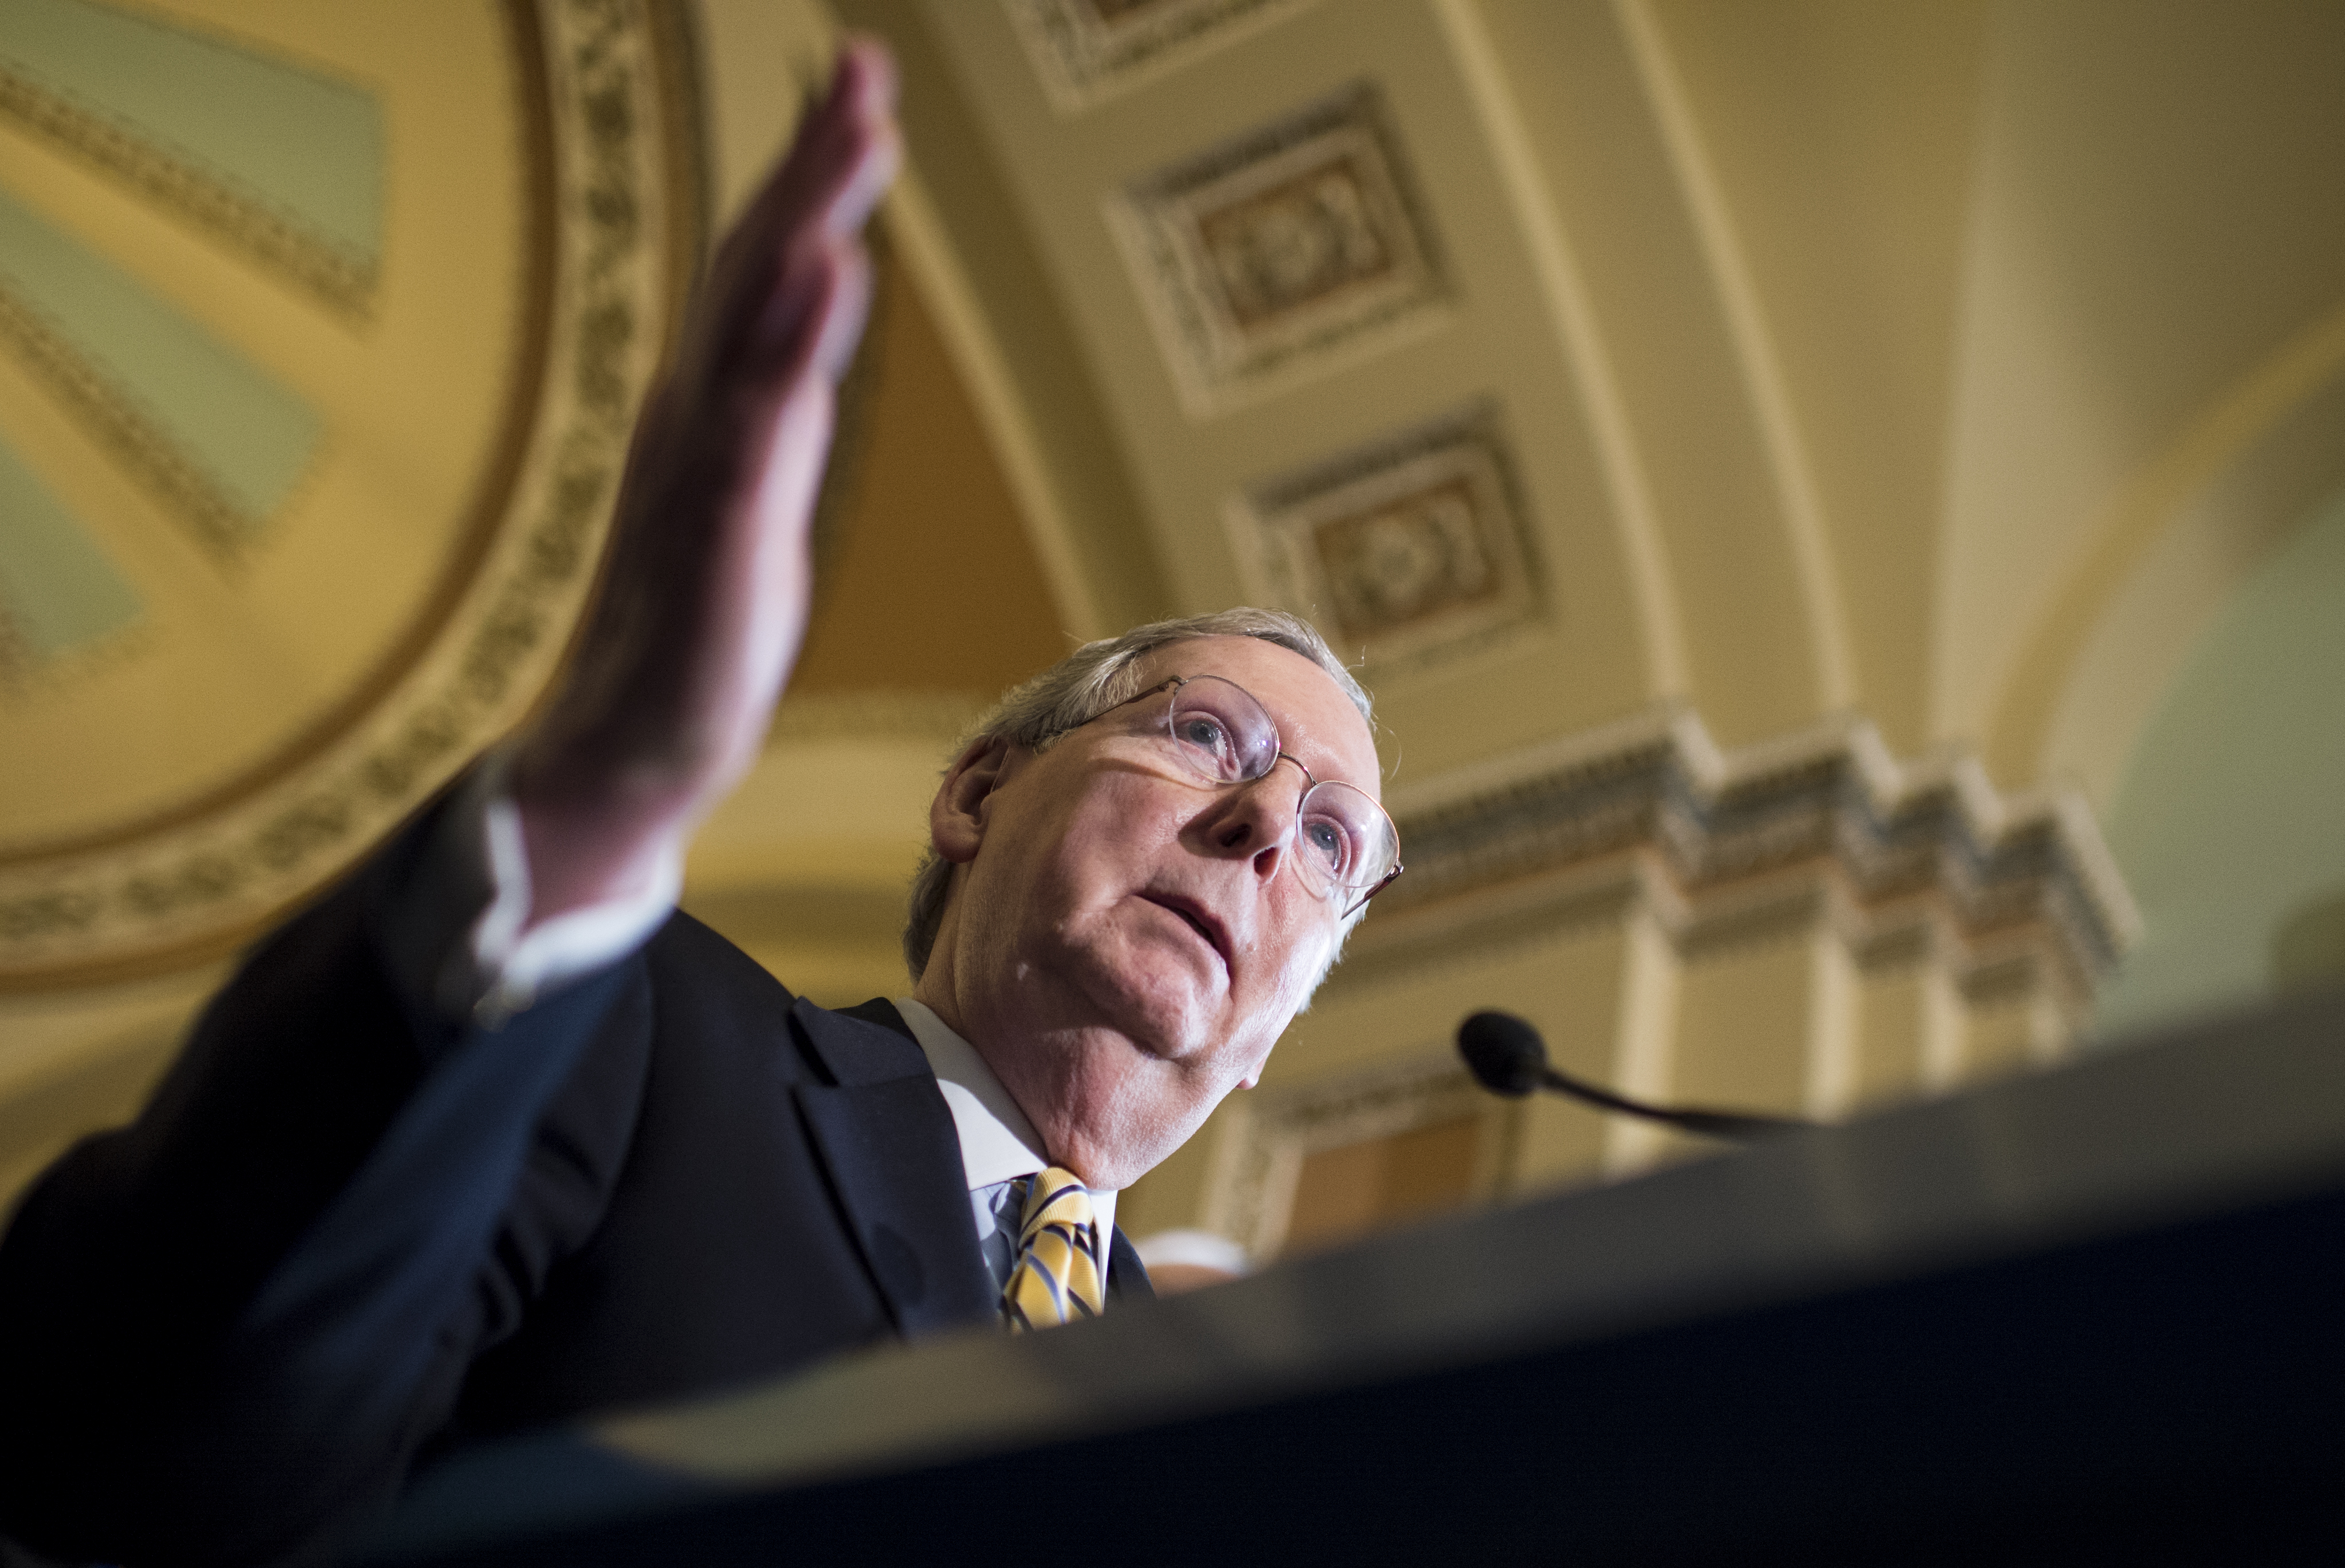 Senate Majority Leader Mitch McConnell, R-Ky., speaks to the media following the Senate Republicans' policy lunch in the Capitol on April 21, 2015. (Bill Clark—AP)